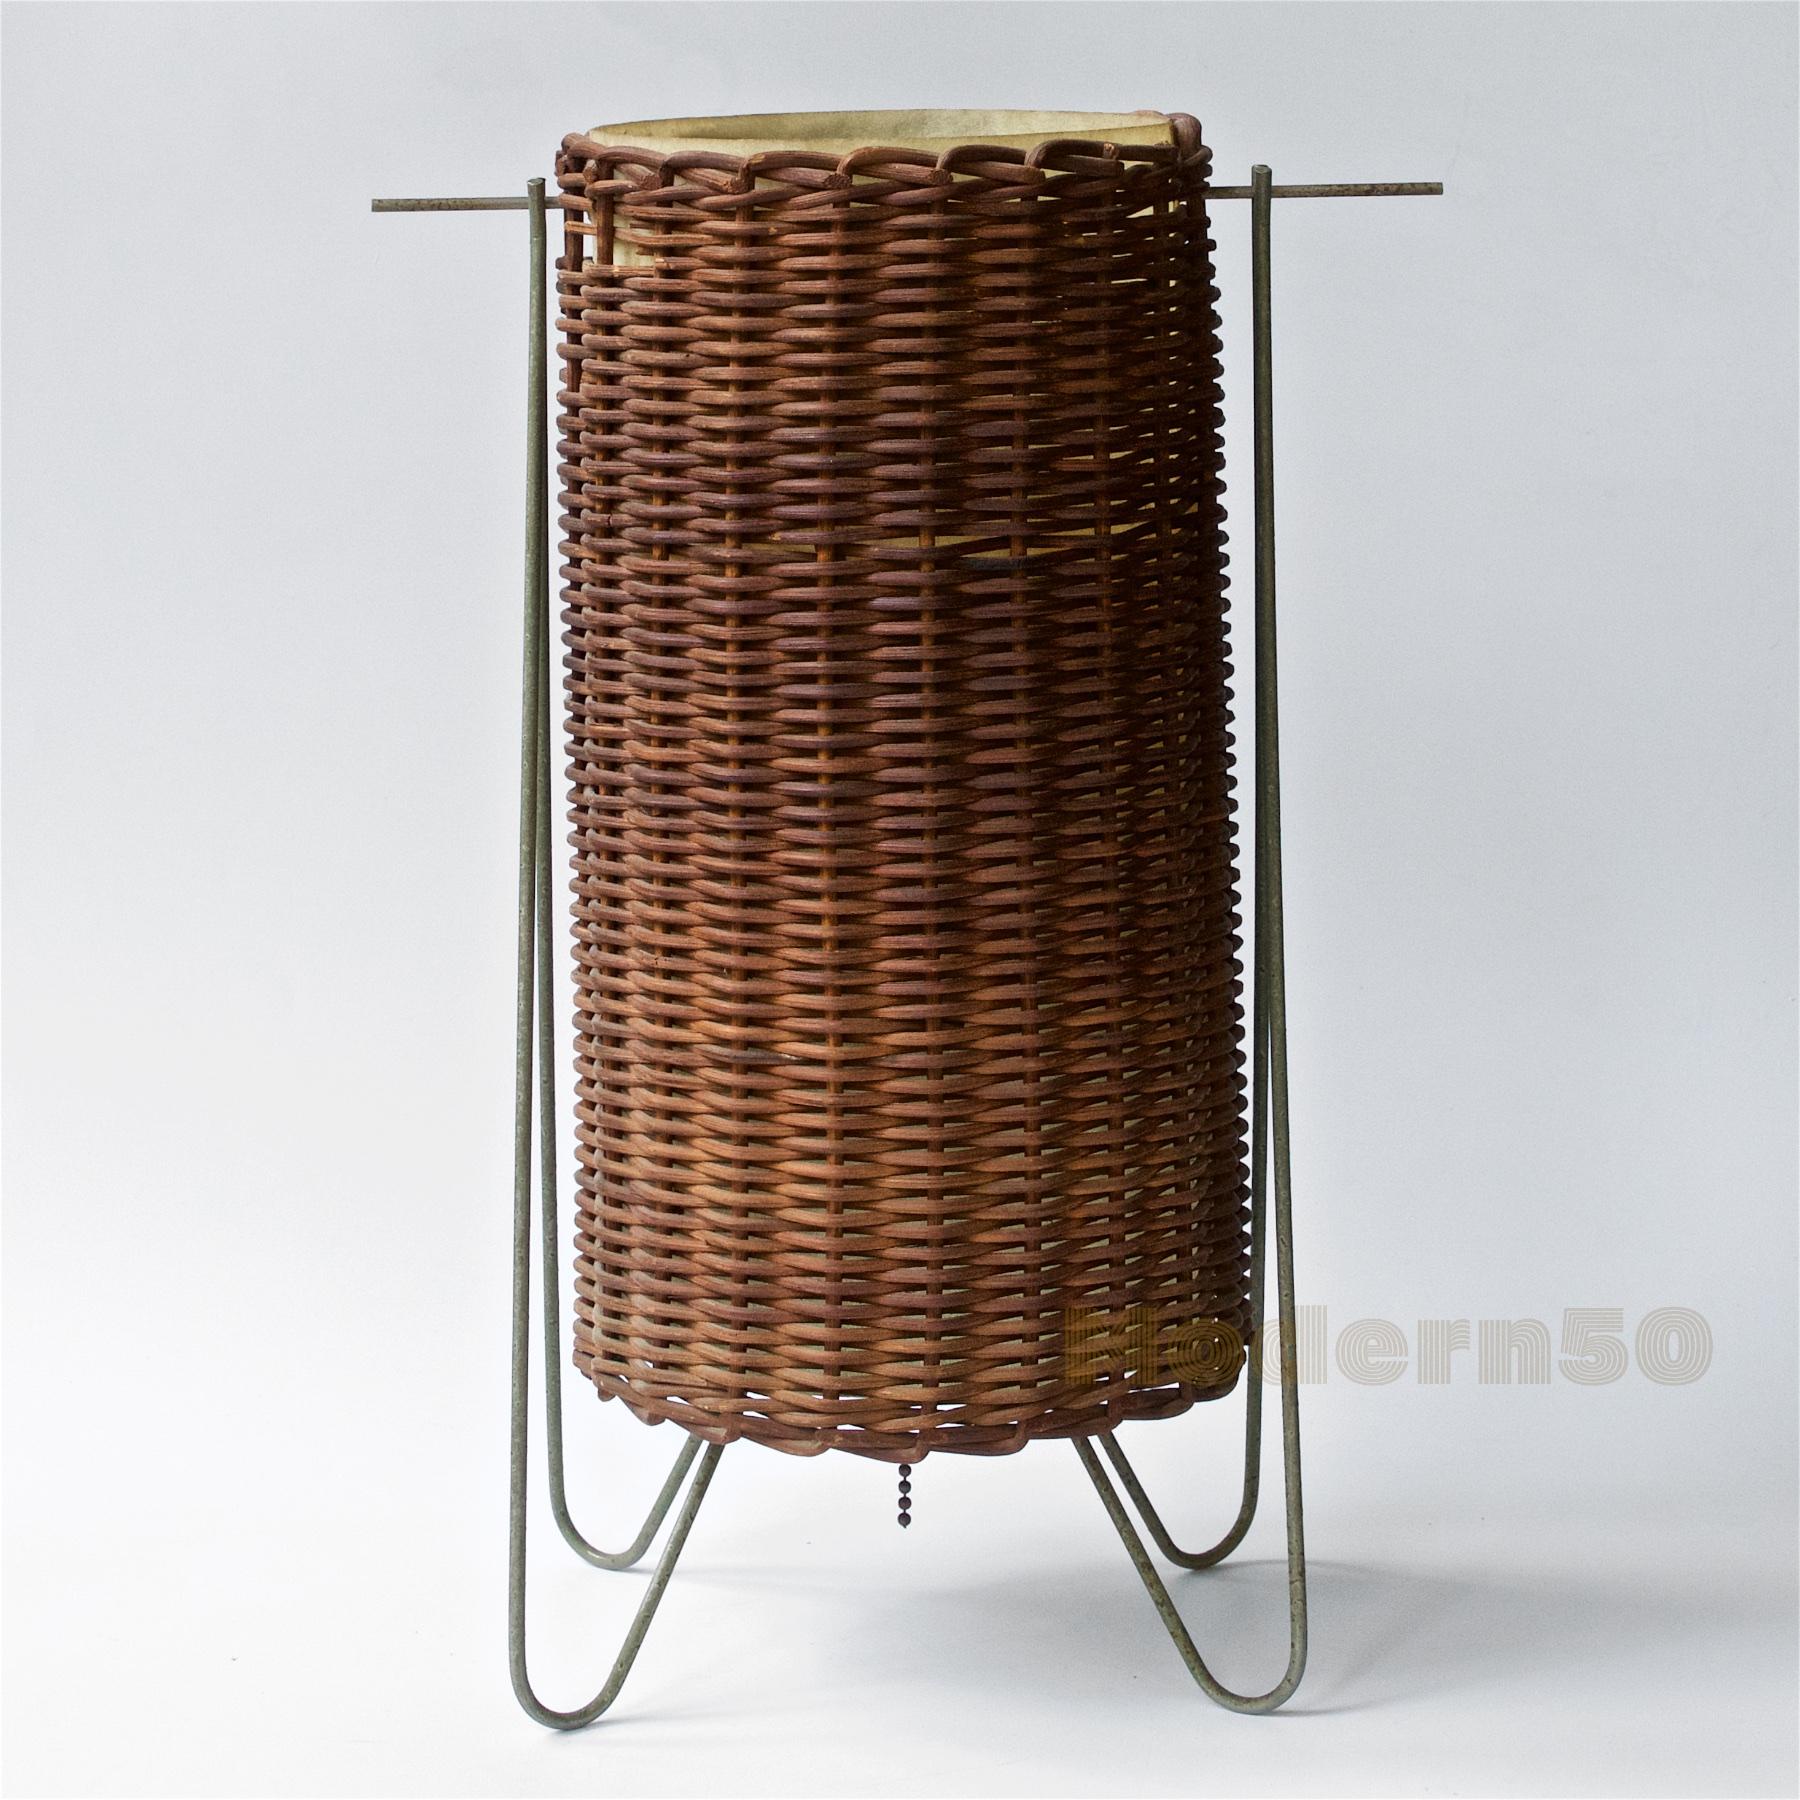 Presented in as-found condition, and fully functional. A rare Paul Mayen design, wicker wrapped soft fiberglass lantern cylinder, in rocking wire cradle. This lamp was distributed by Nardin + Radoczy of NYC, and selected for the Fall 1951 MoMA Good